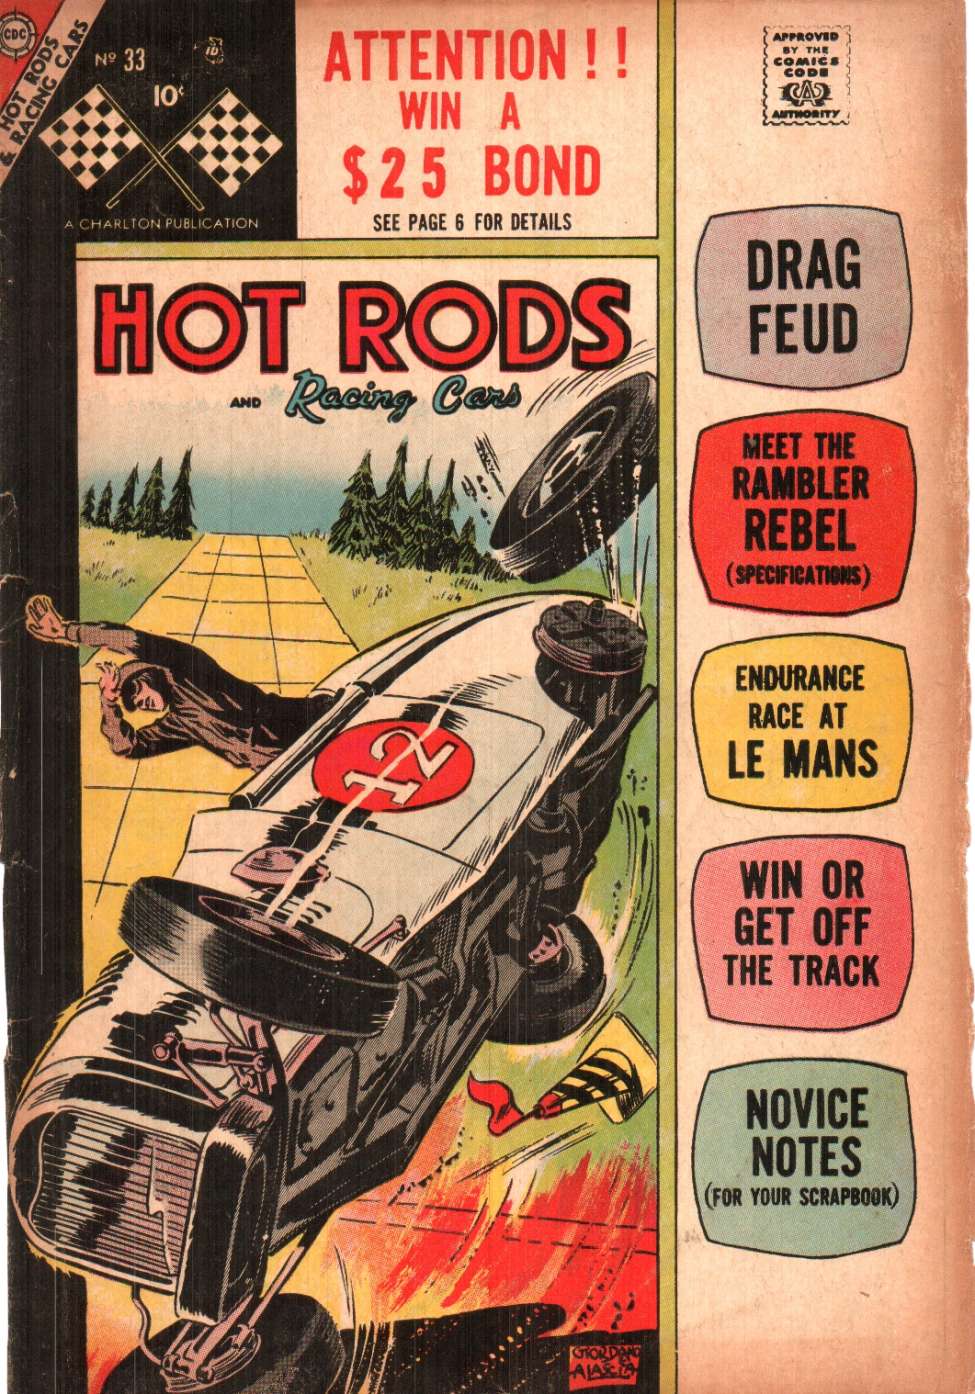 Comic Book Cover For Hot Rods and Racing Cars 33 - Version 1